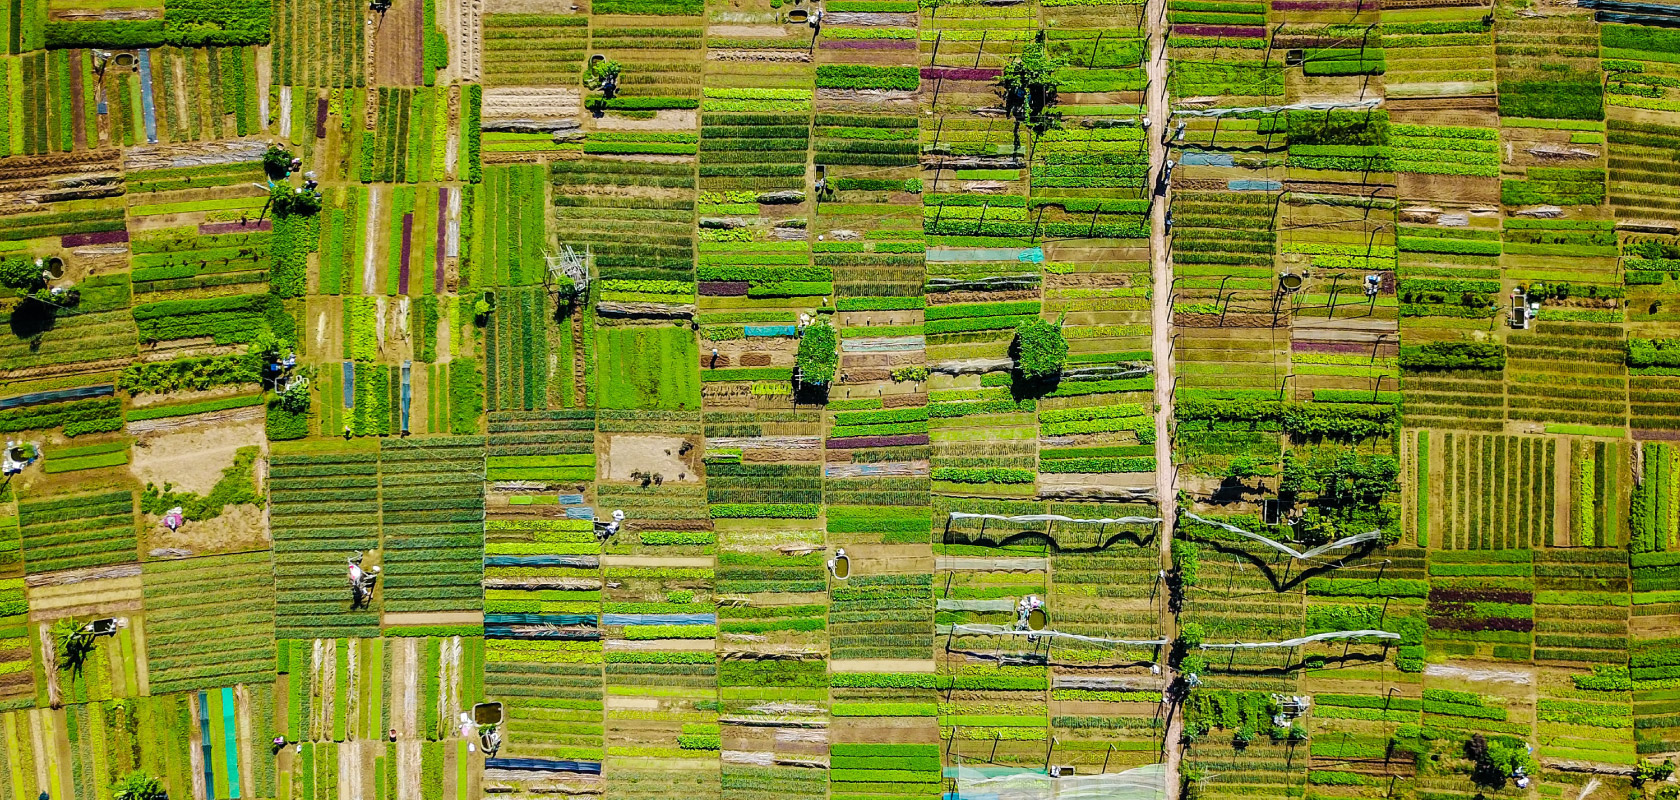 Bird eye view of a rice field in Southeast Asia